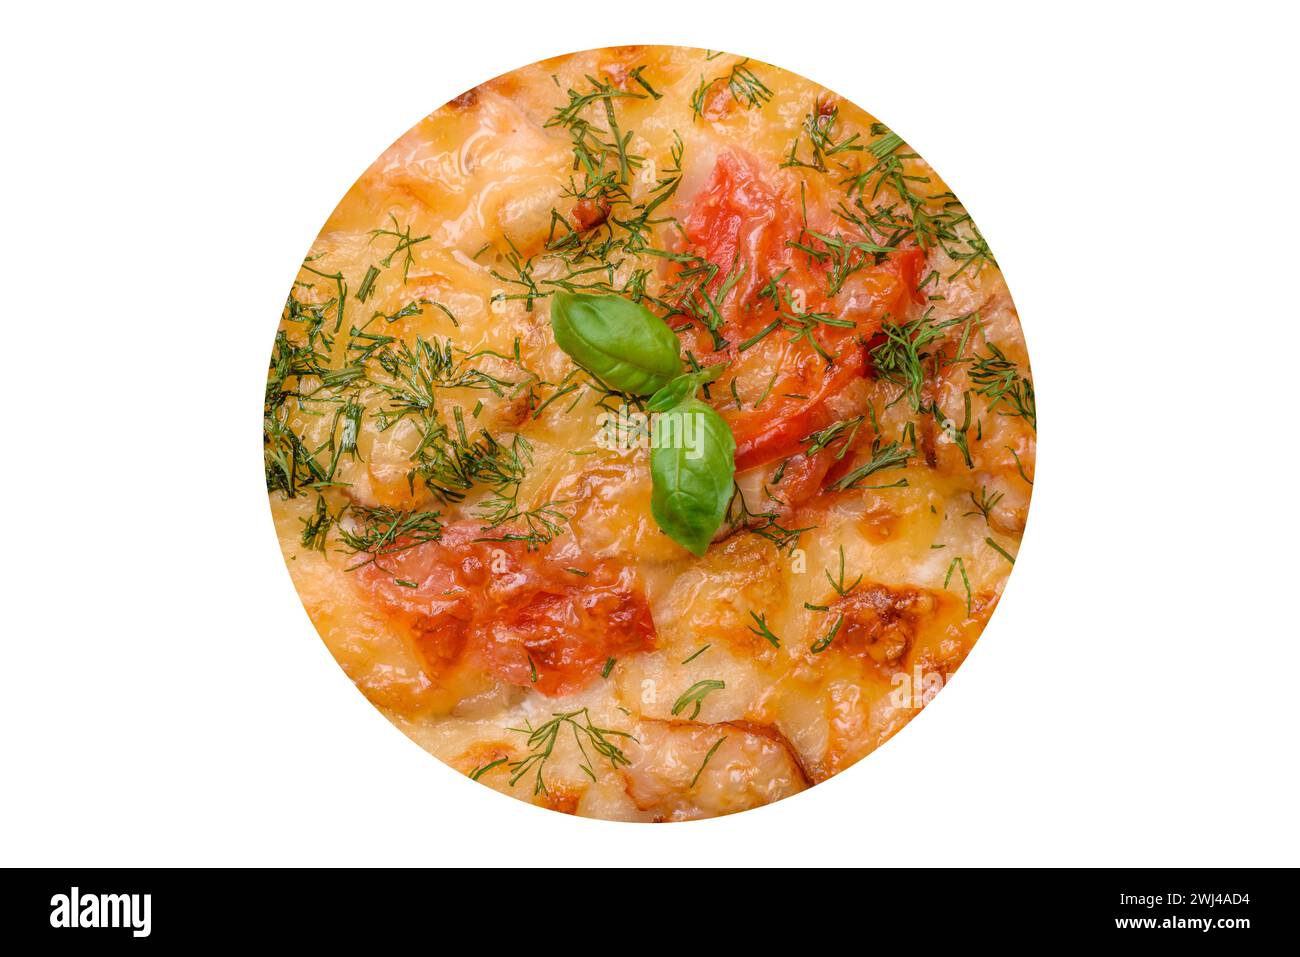 Delicious oven fresh flatbread pizza with cheese, tomatoes, sausage, salt and spices Stock Photo